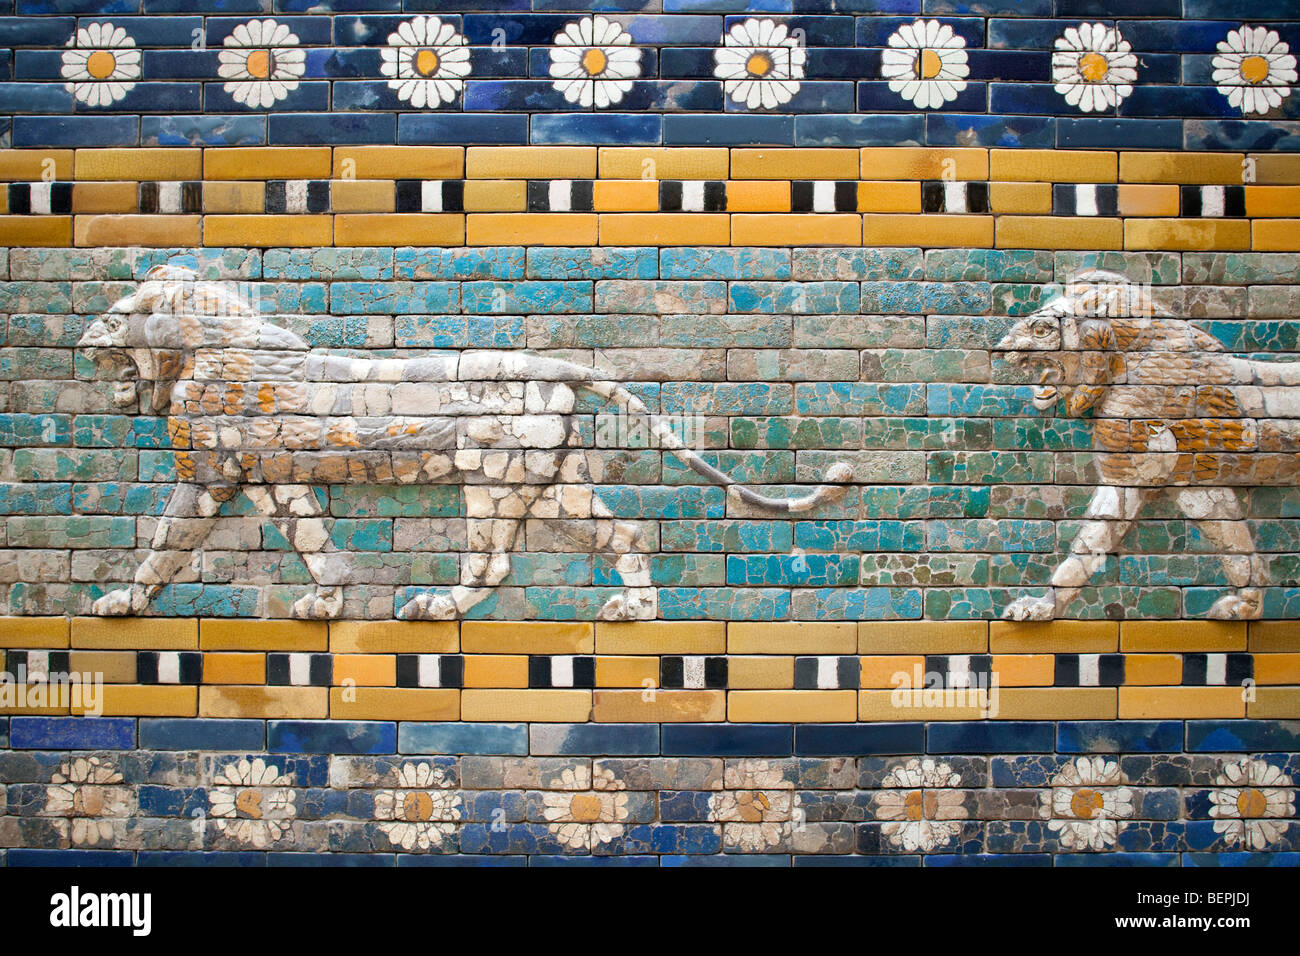 Lions in glazed ceramic from the processional way of Ishtar Gate (Babylon), Pergamon Museum, Berlin, Germany Stock Photo